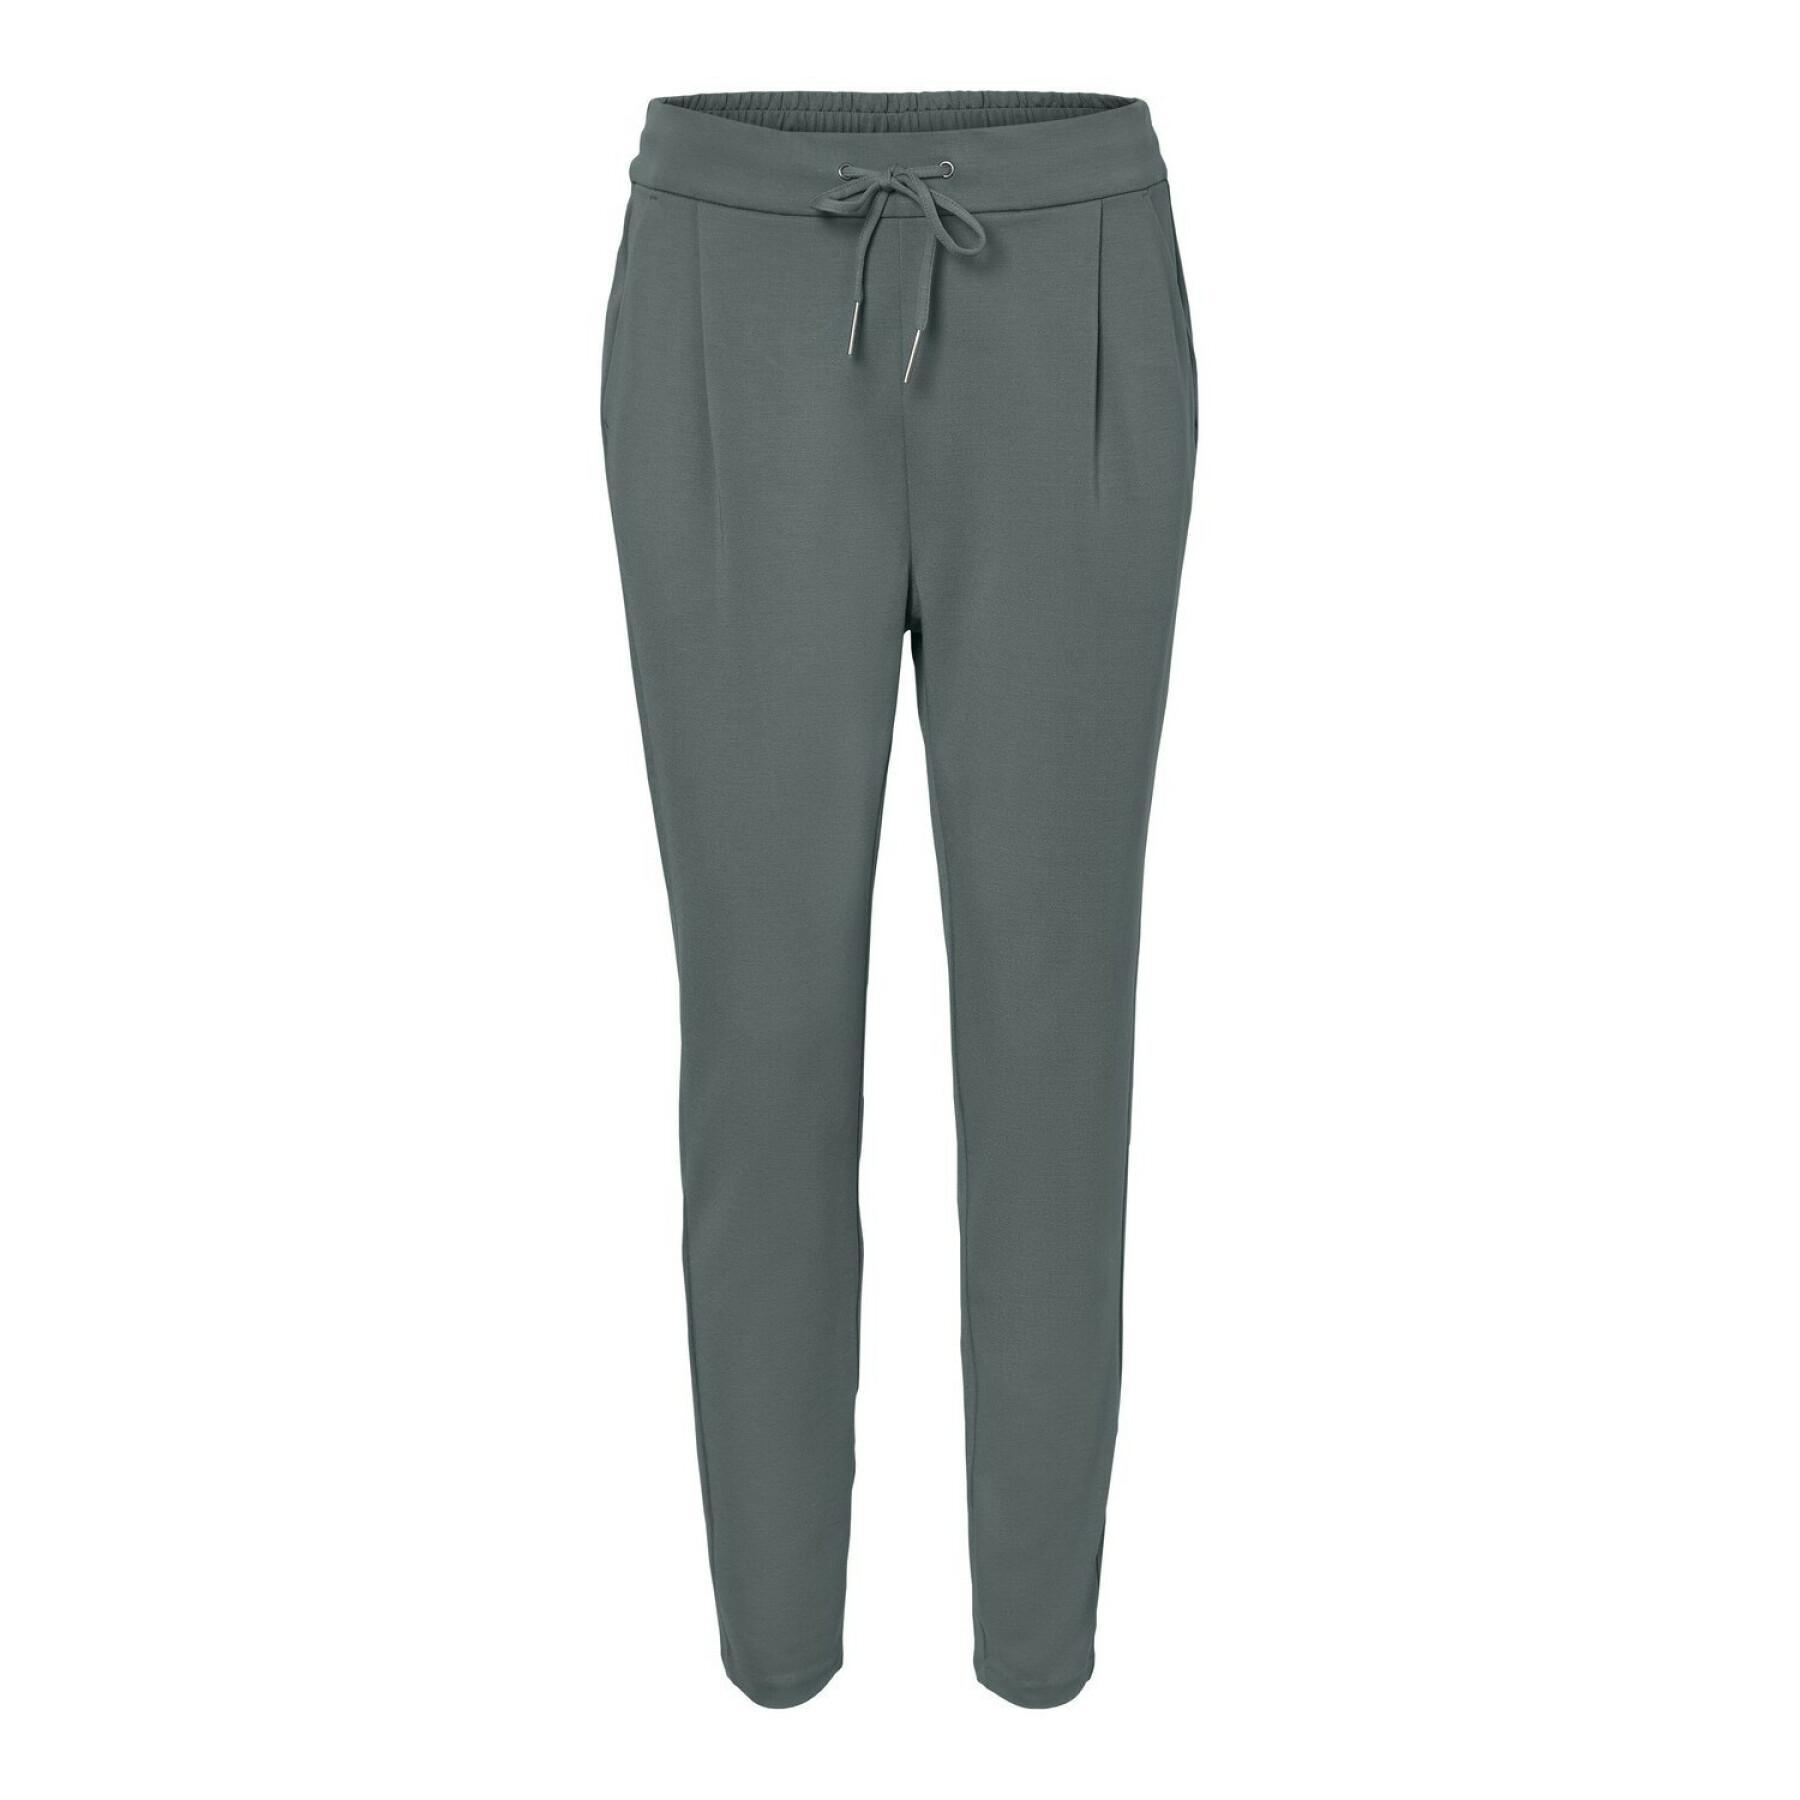 Women's trousers Vero Moda vmeva loose string - Trousers and Jeans - Woman  - Lifestyle